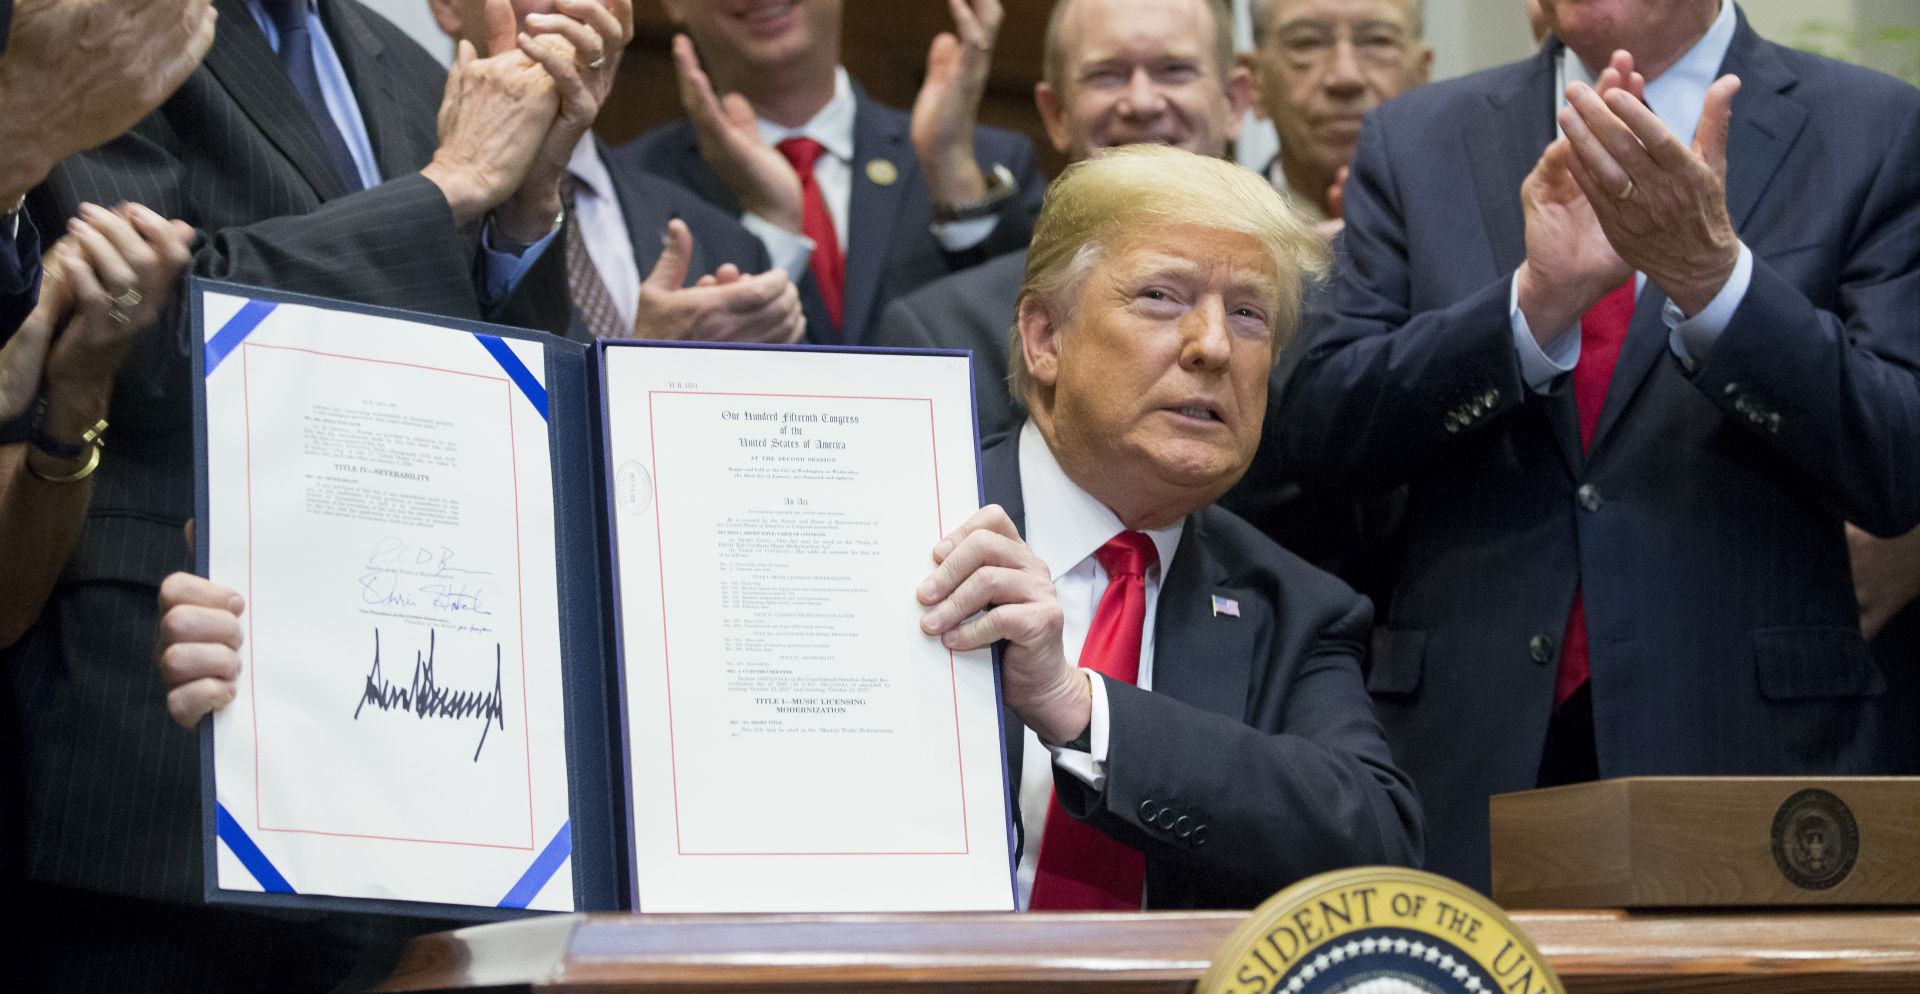 epa07086784 US President Donald J. Trump (C) holds up the 'Orrin G. Hatch-Bob Goodlatte Music Modernization Act', after signing it during a ceremony in the Roosevelt Room of the White House in Washington, DC, USA, 11 October 2018. The act is aimed at updating music copyright law for the digital era.  EPA/MICHAEL REYNOLDS